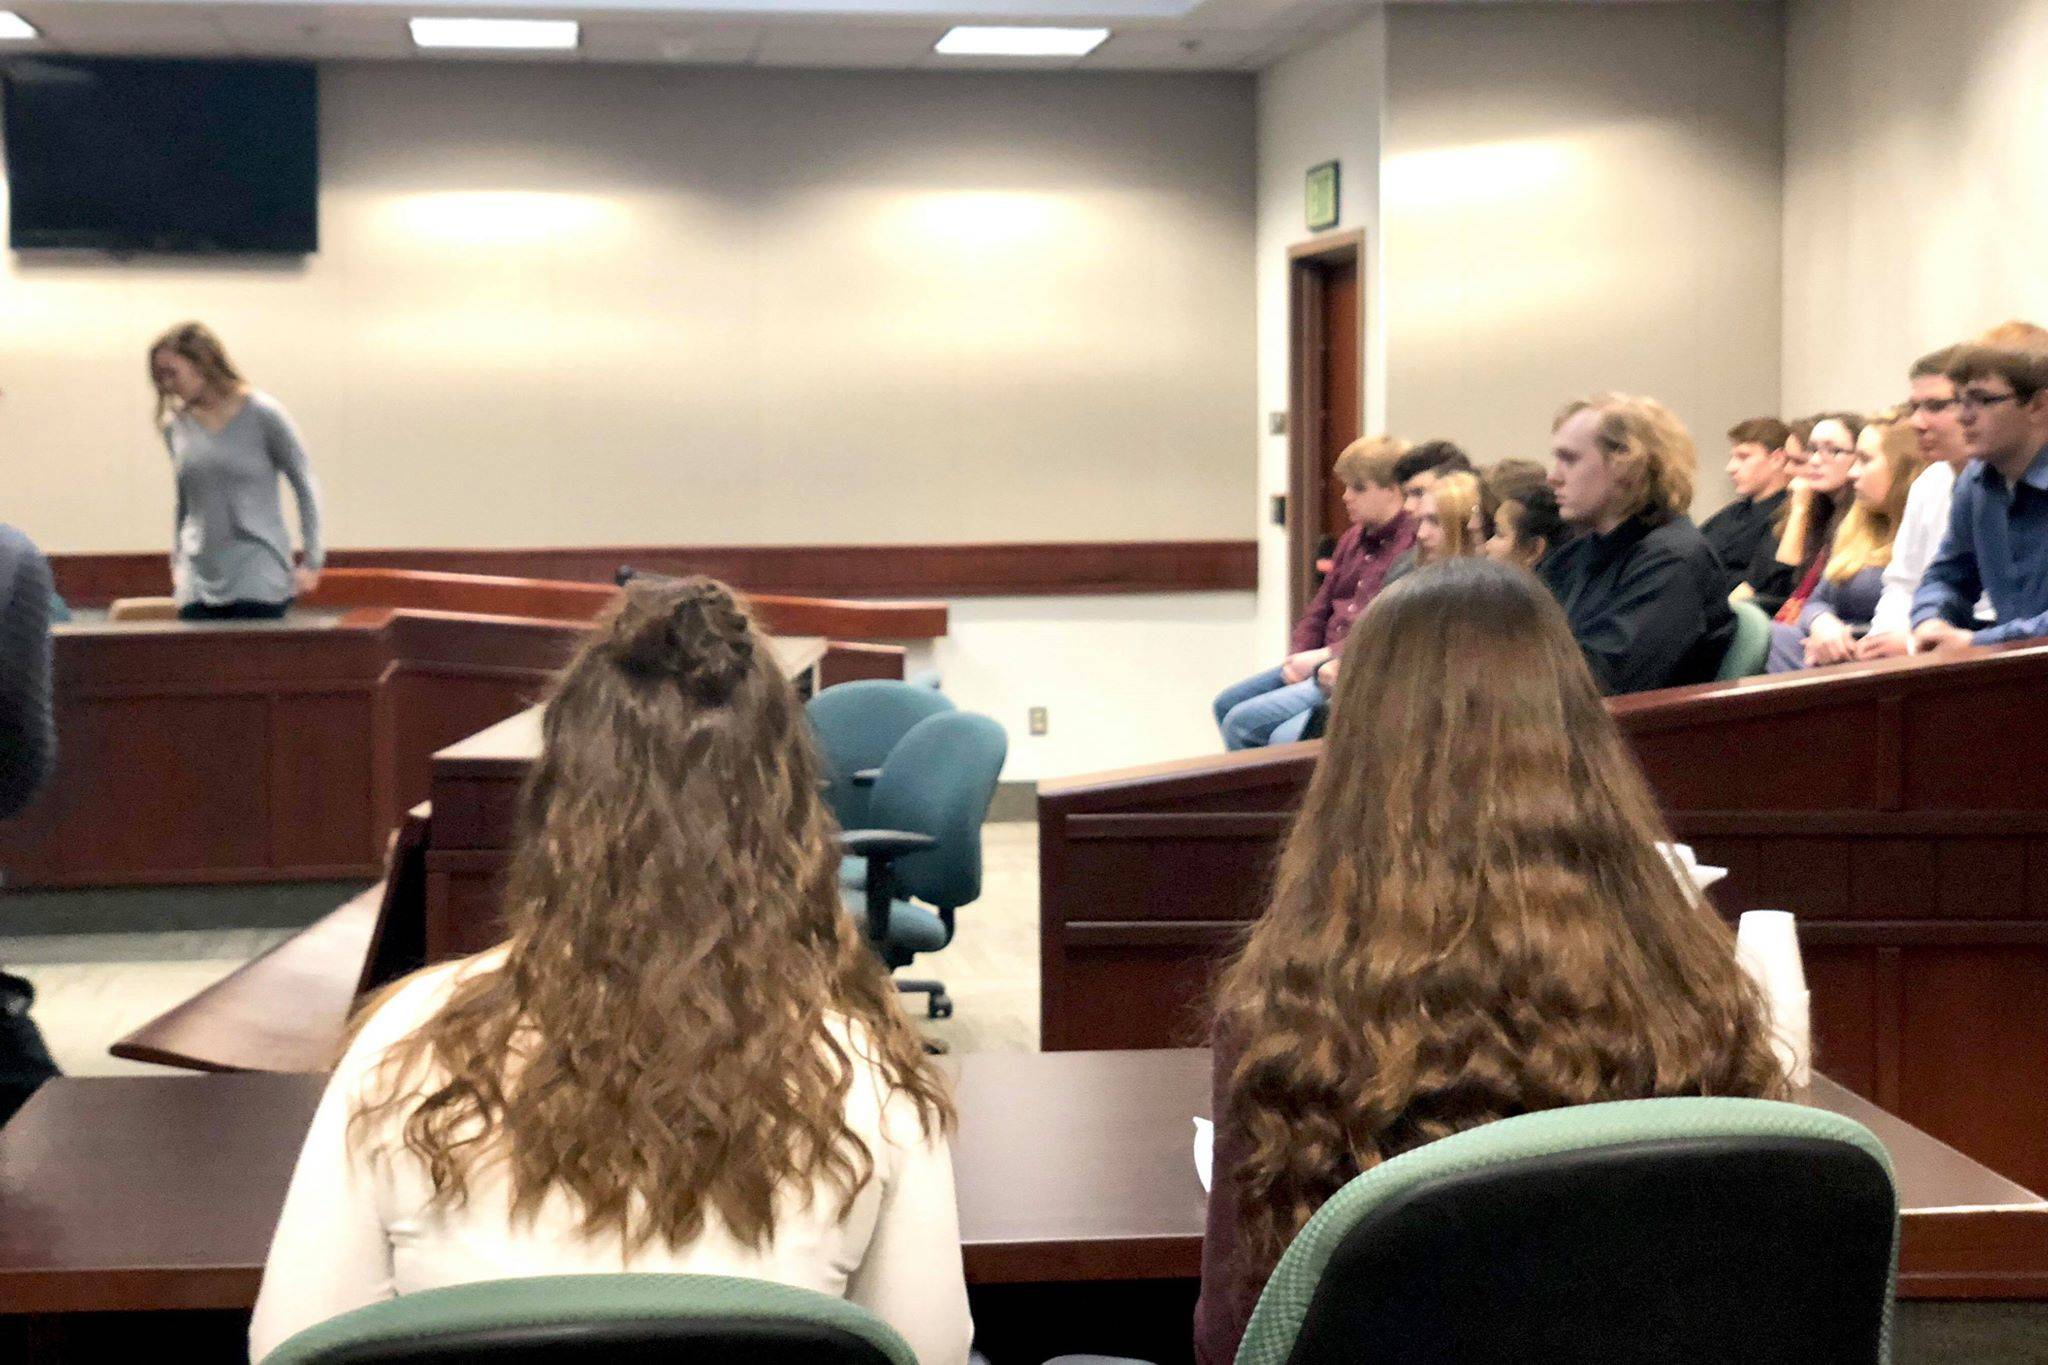 Mock defense attorneys, Emma Wik and Kelsey Clark, sit and wait while a witness is questioned during Nikiski High’s mock trial event on Thursday at the Kenai Courthouse. (Photo by Victoria Petersen/Peninsula Clarion)